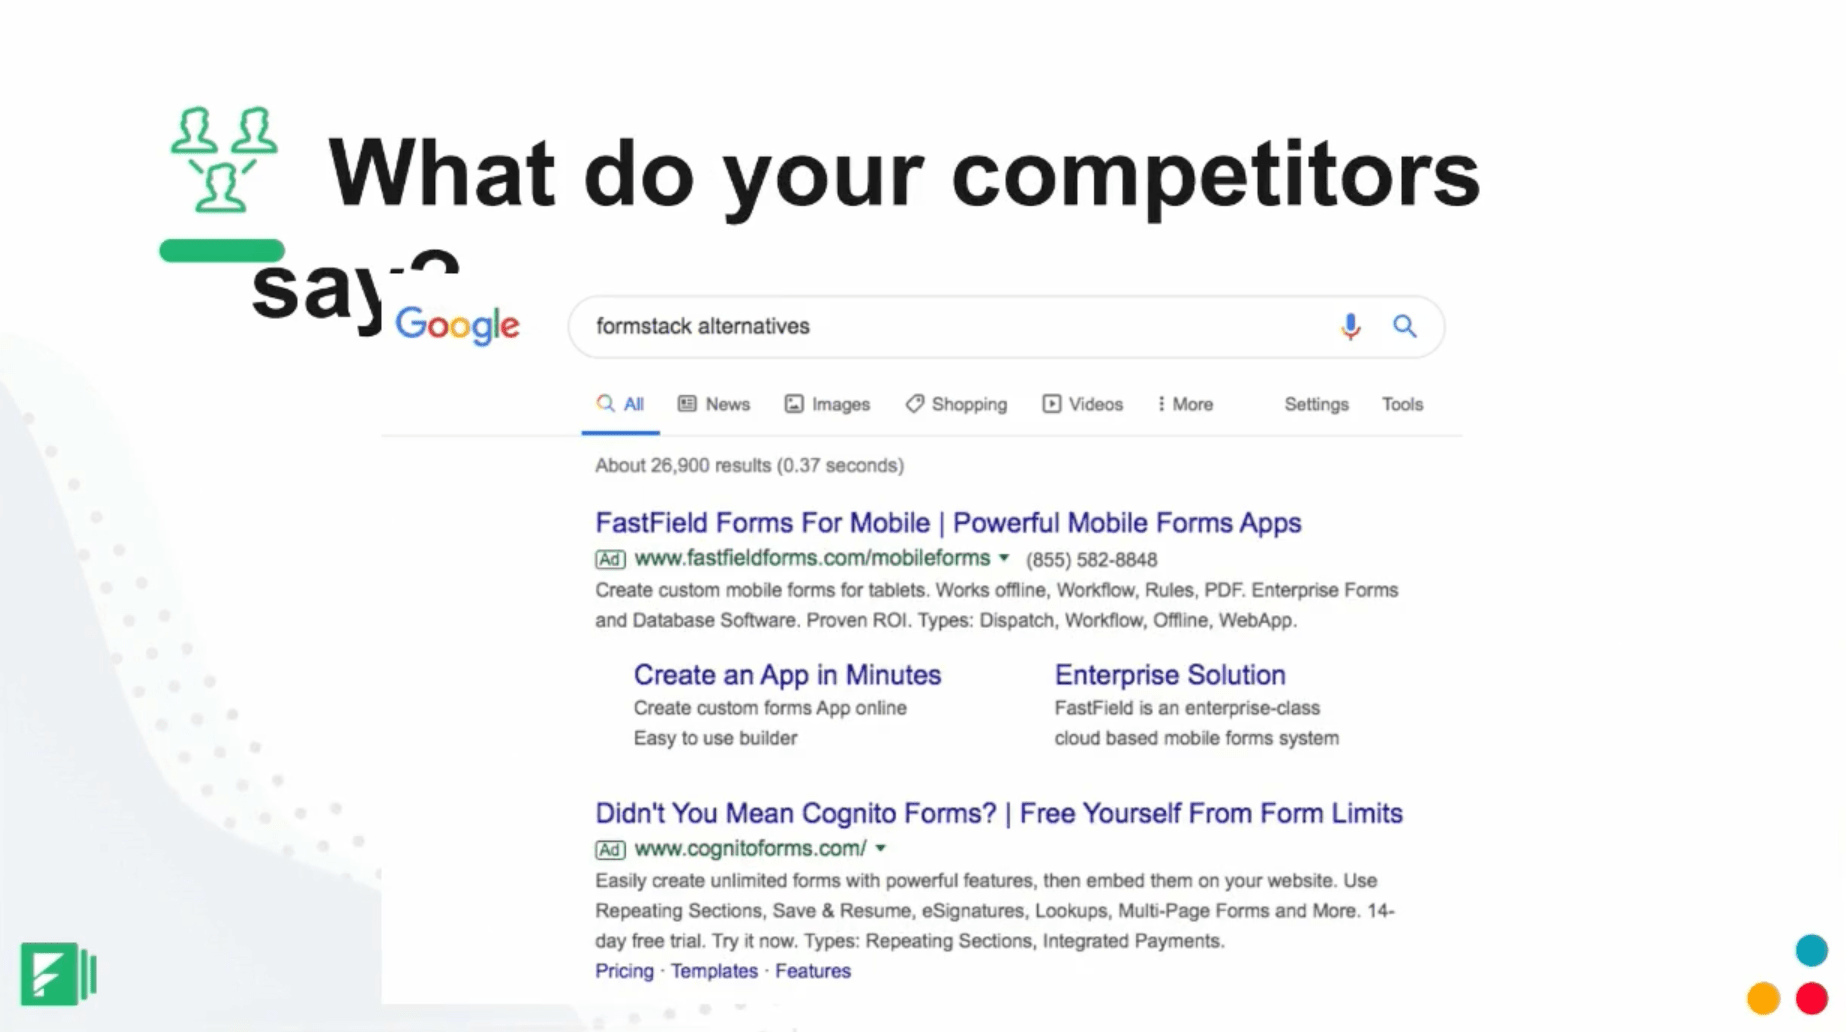 If your competitors are trying to compete against you, they obviously think they have something over you, they are filling a need that you aren't, and they can pull share away from you.